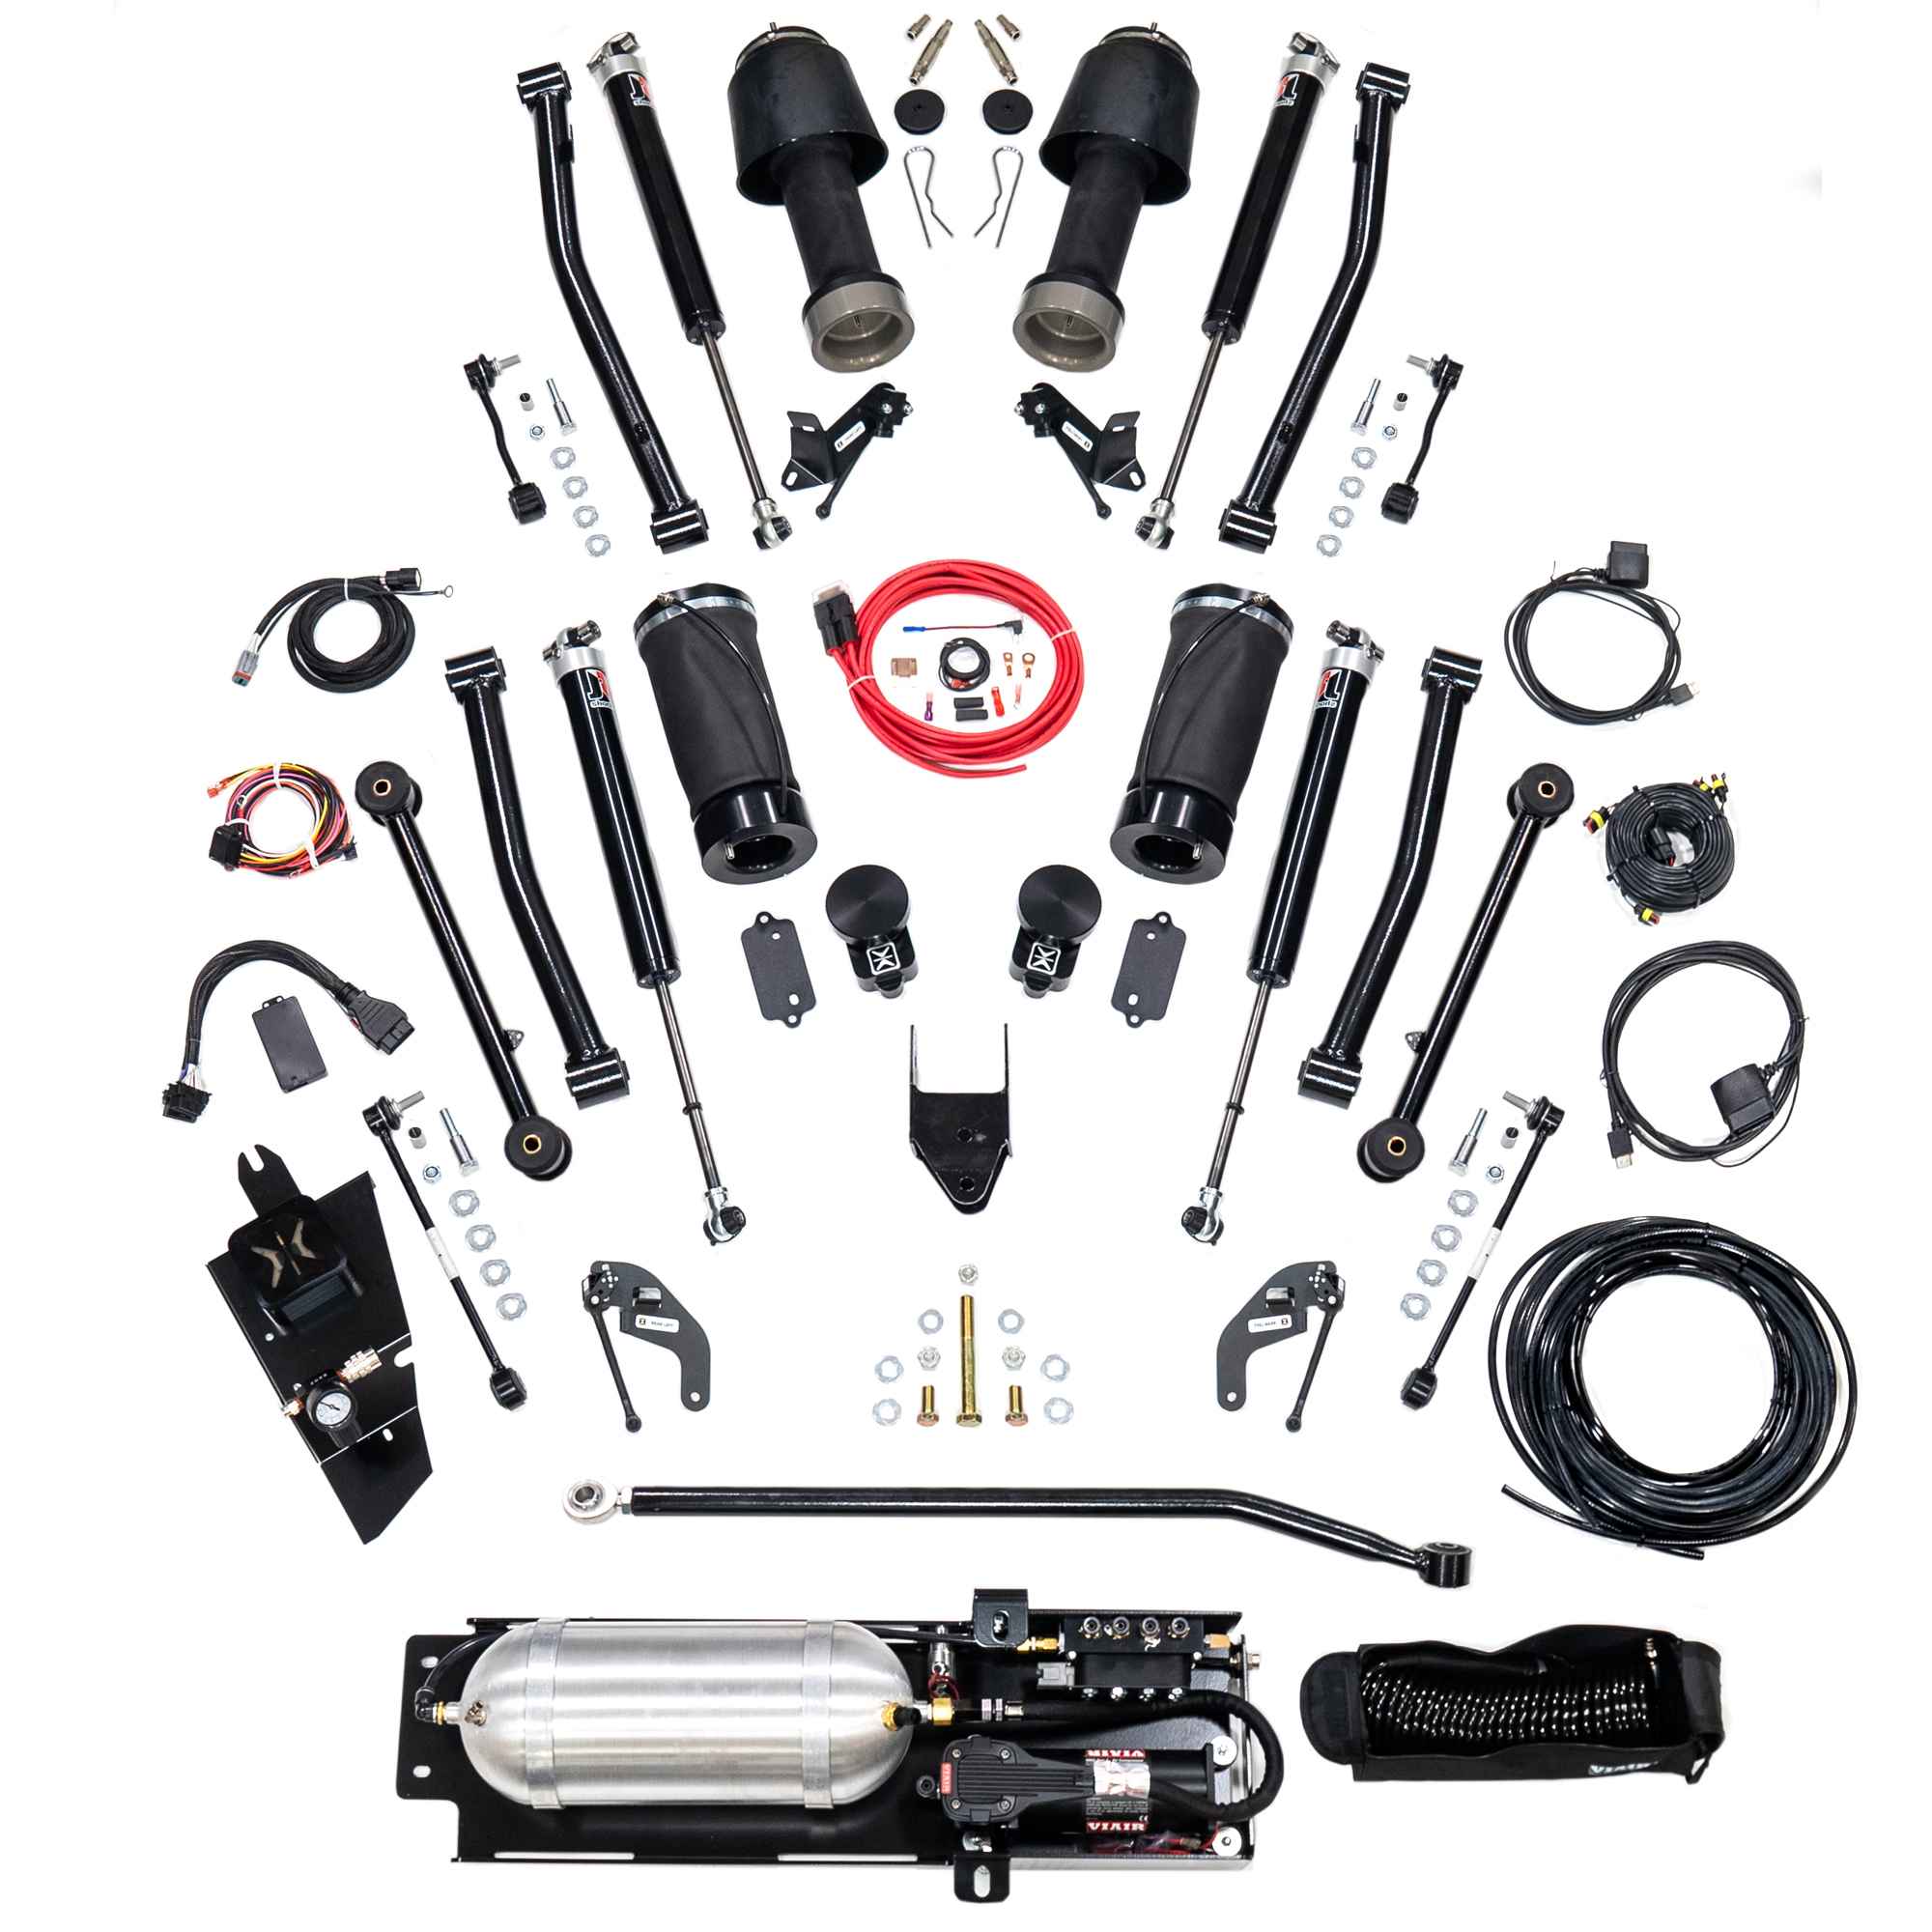 AccuAir 35-inch Dynamic Lift Kit, Jeep Wrangler Unlimited JL four-door